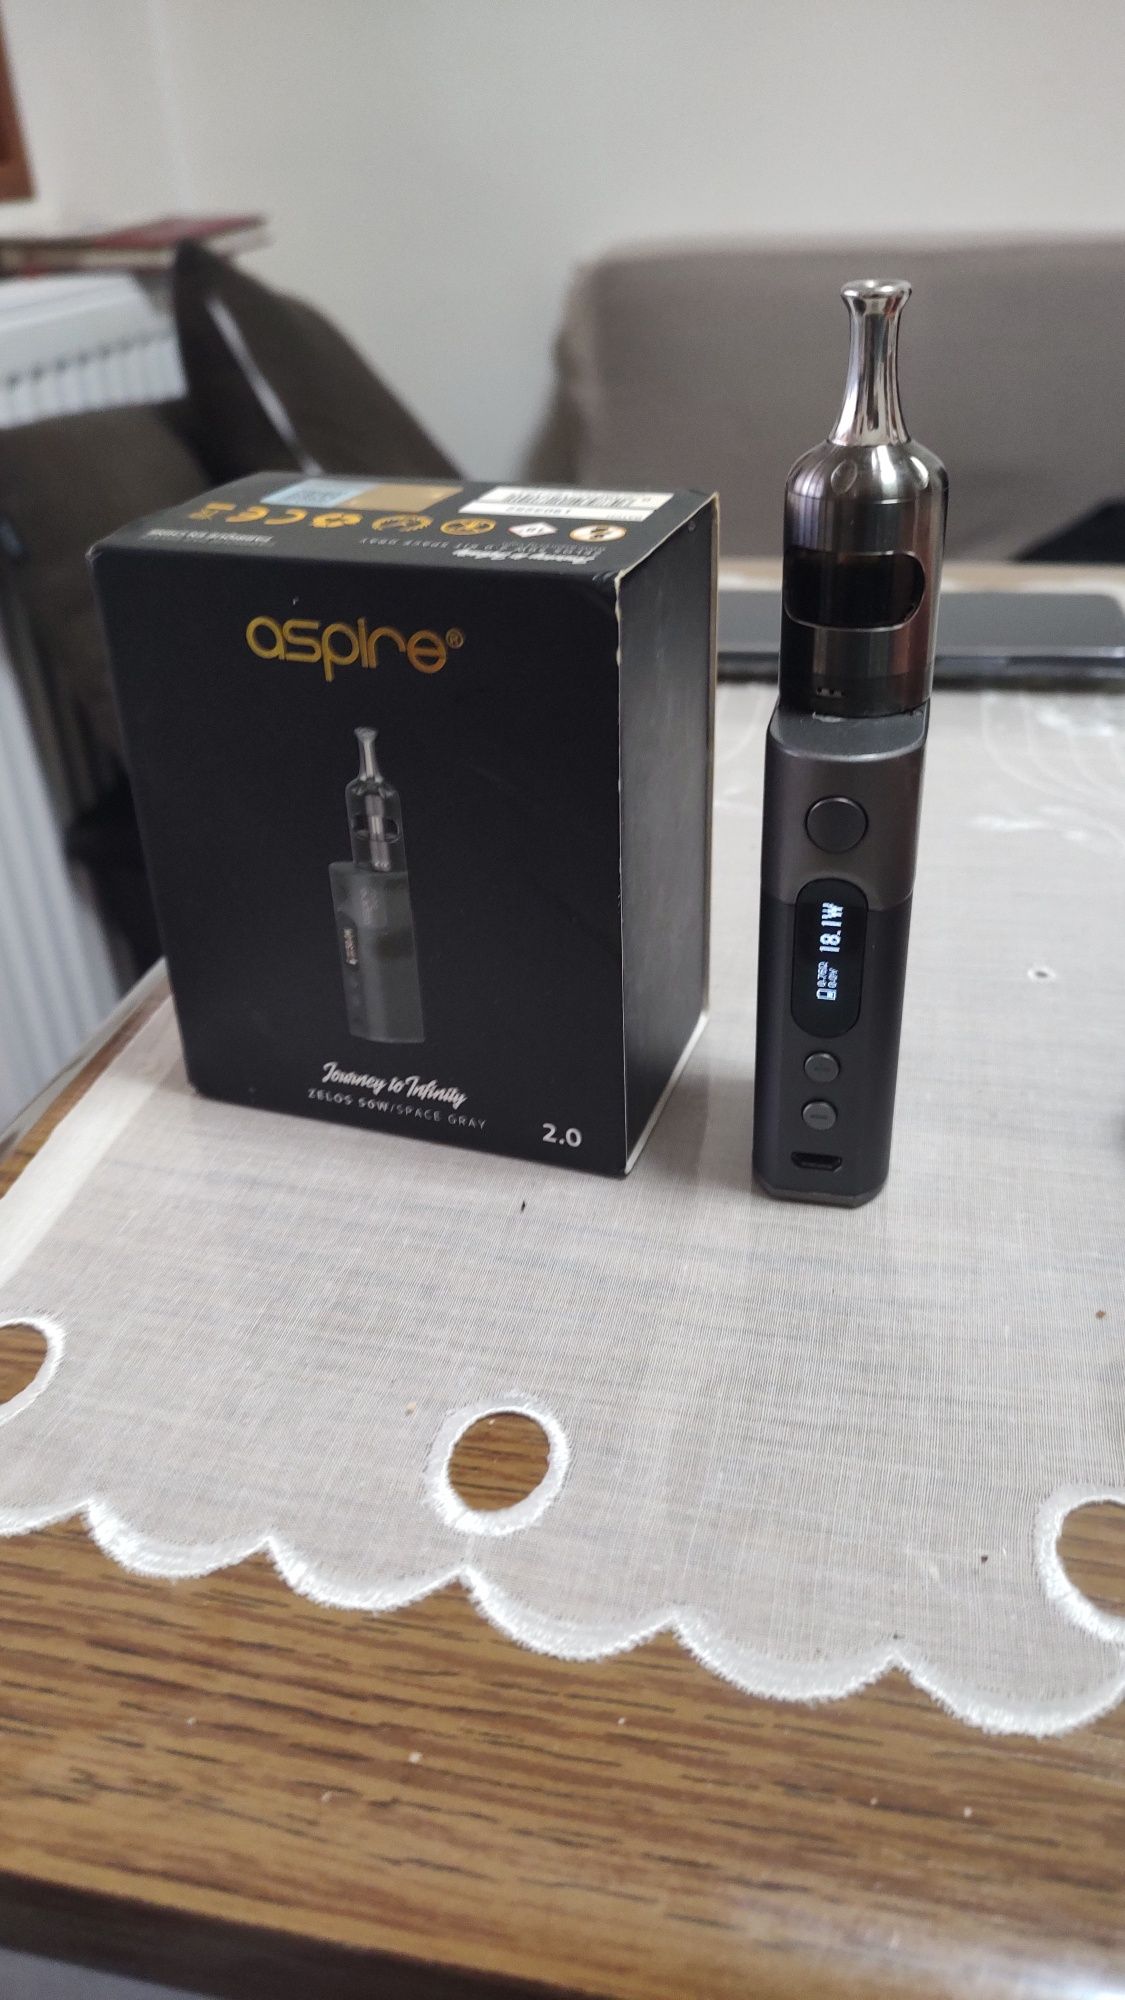 Tigare electronica Aspire zelos 50w kit complet